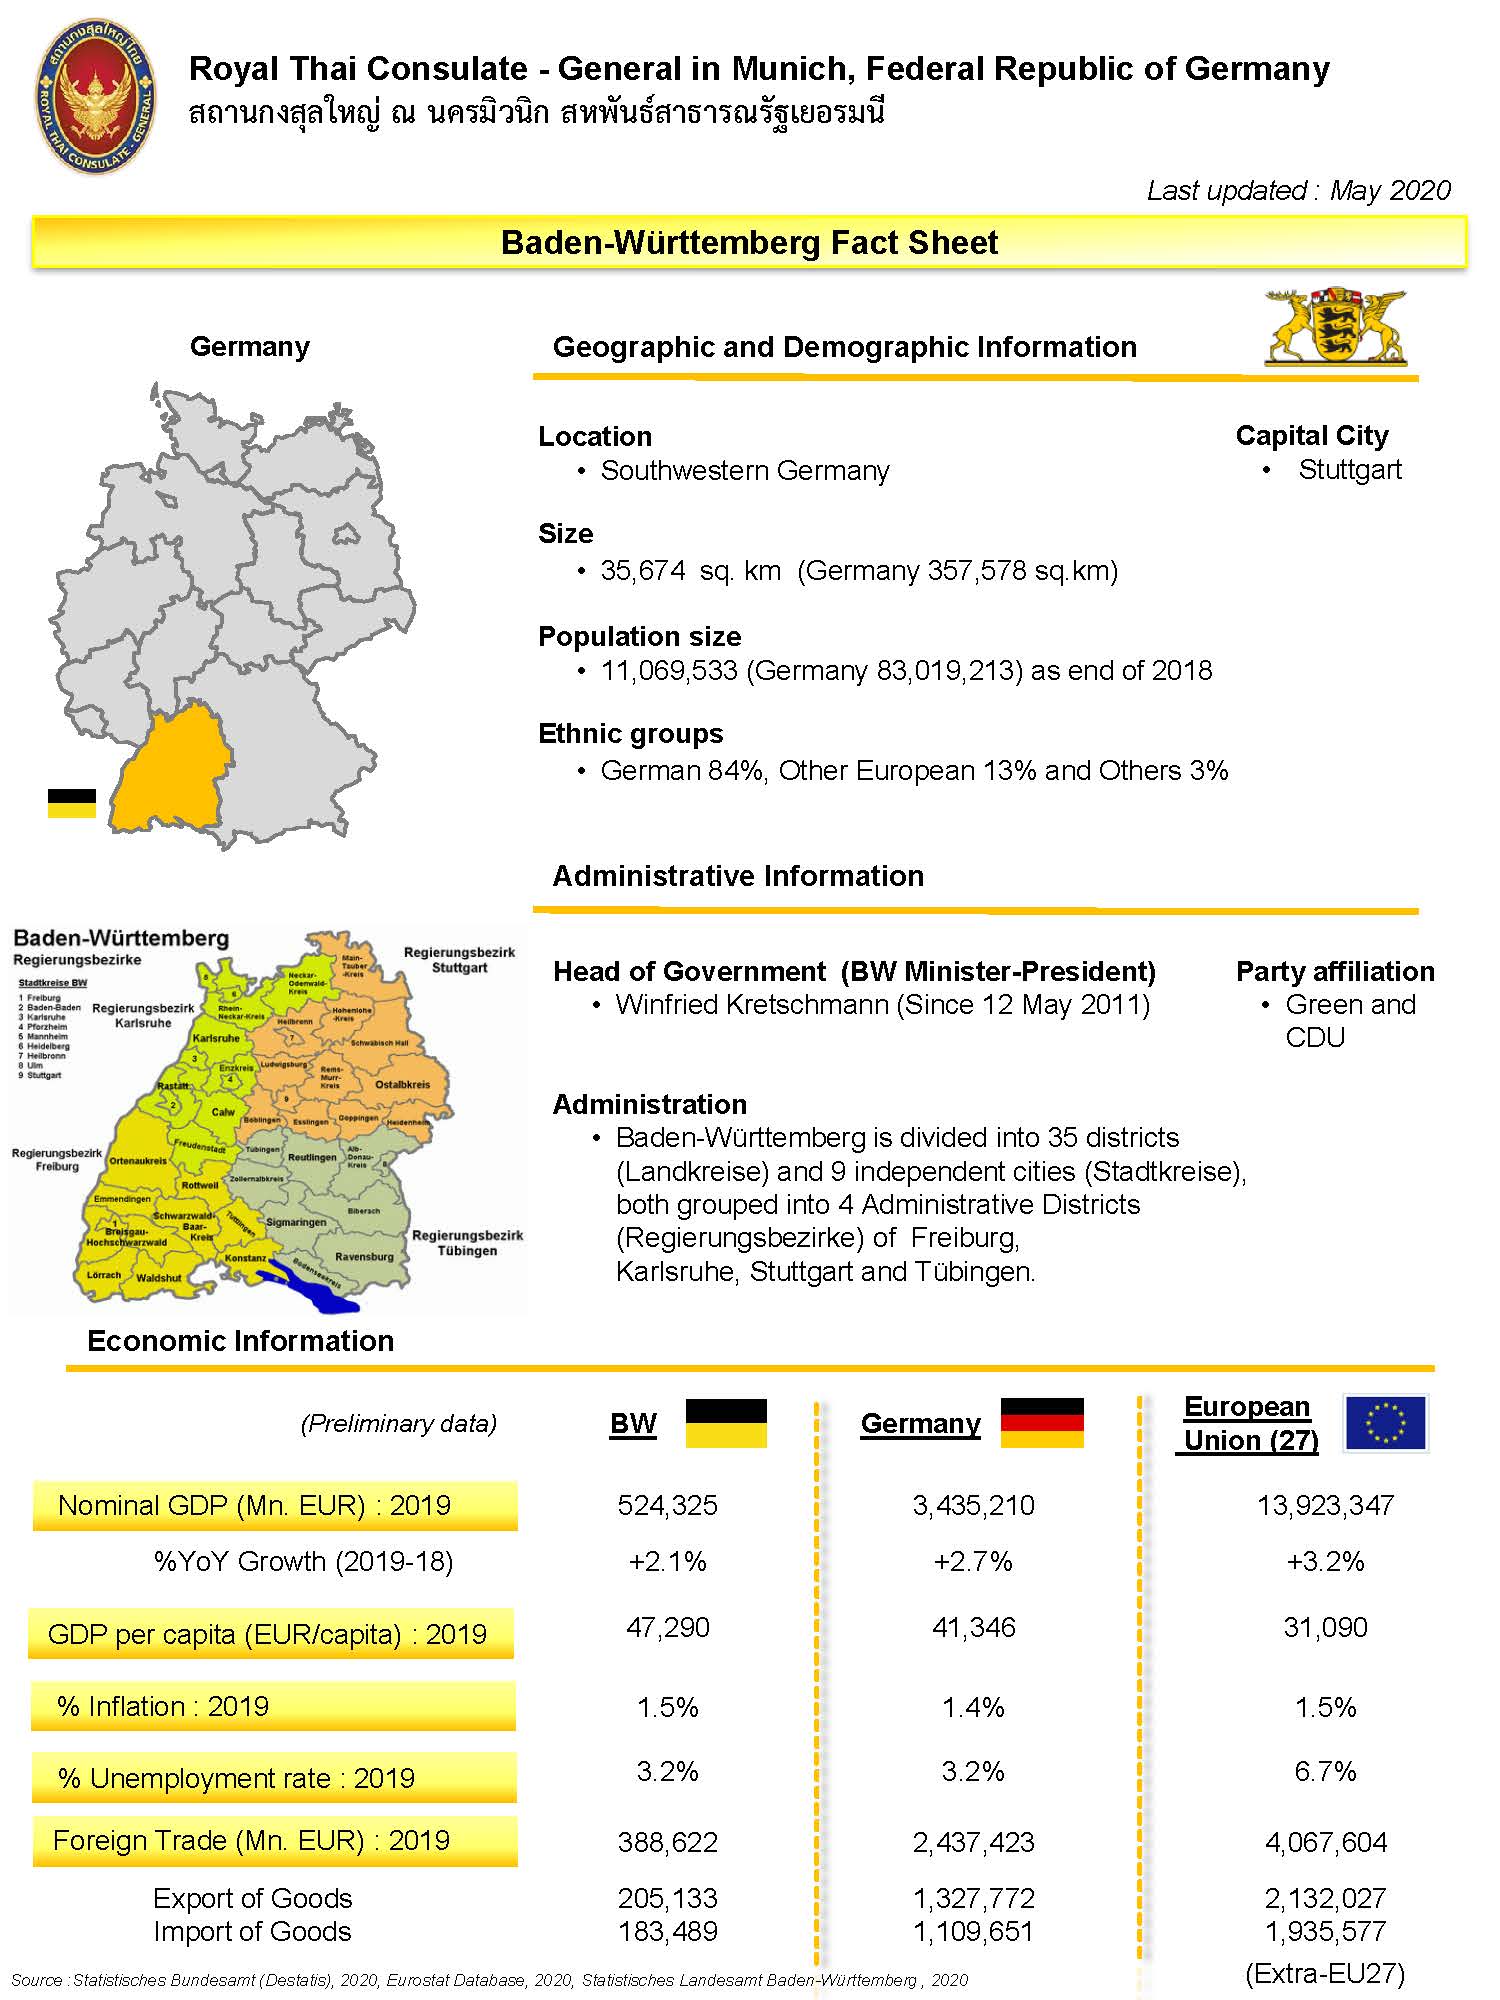 Baden-Württemberg_Fact_Sheet_as_of_May_2020_Page_1